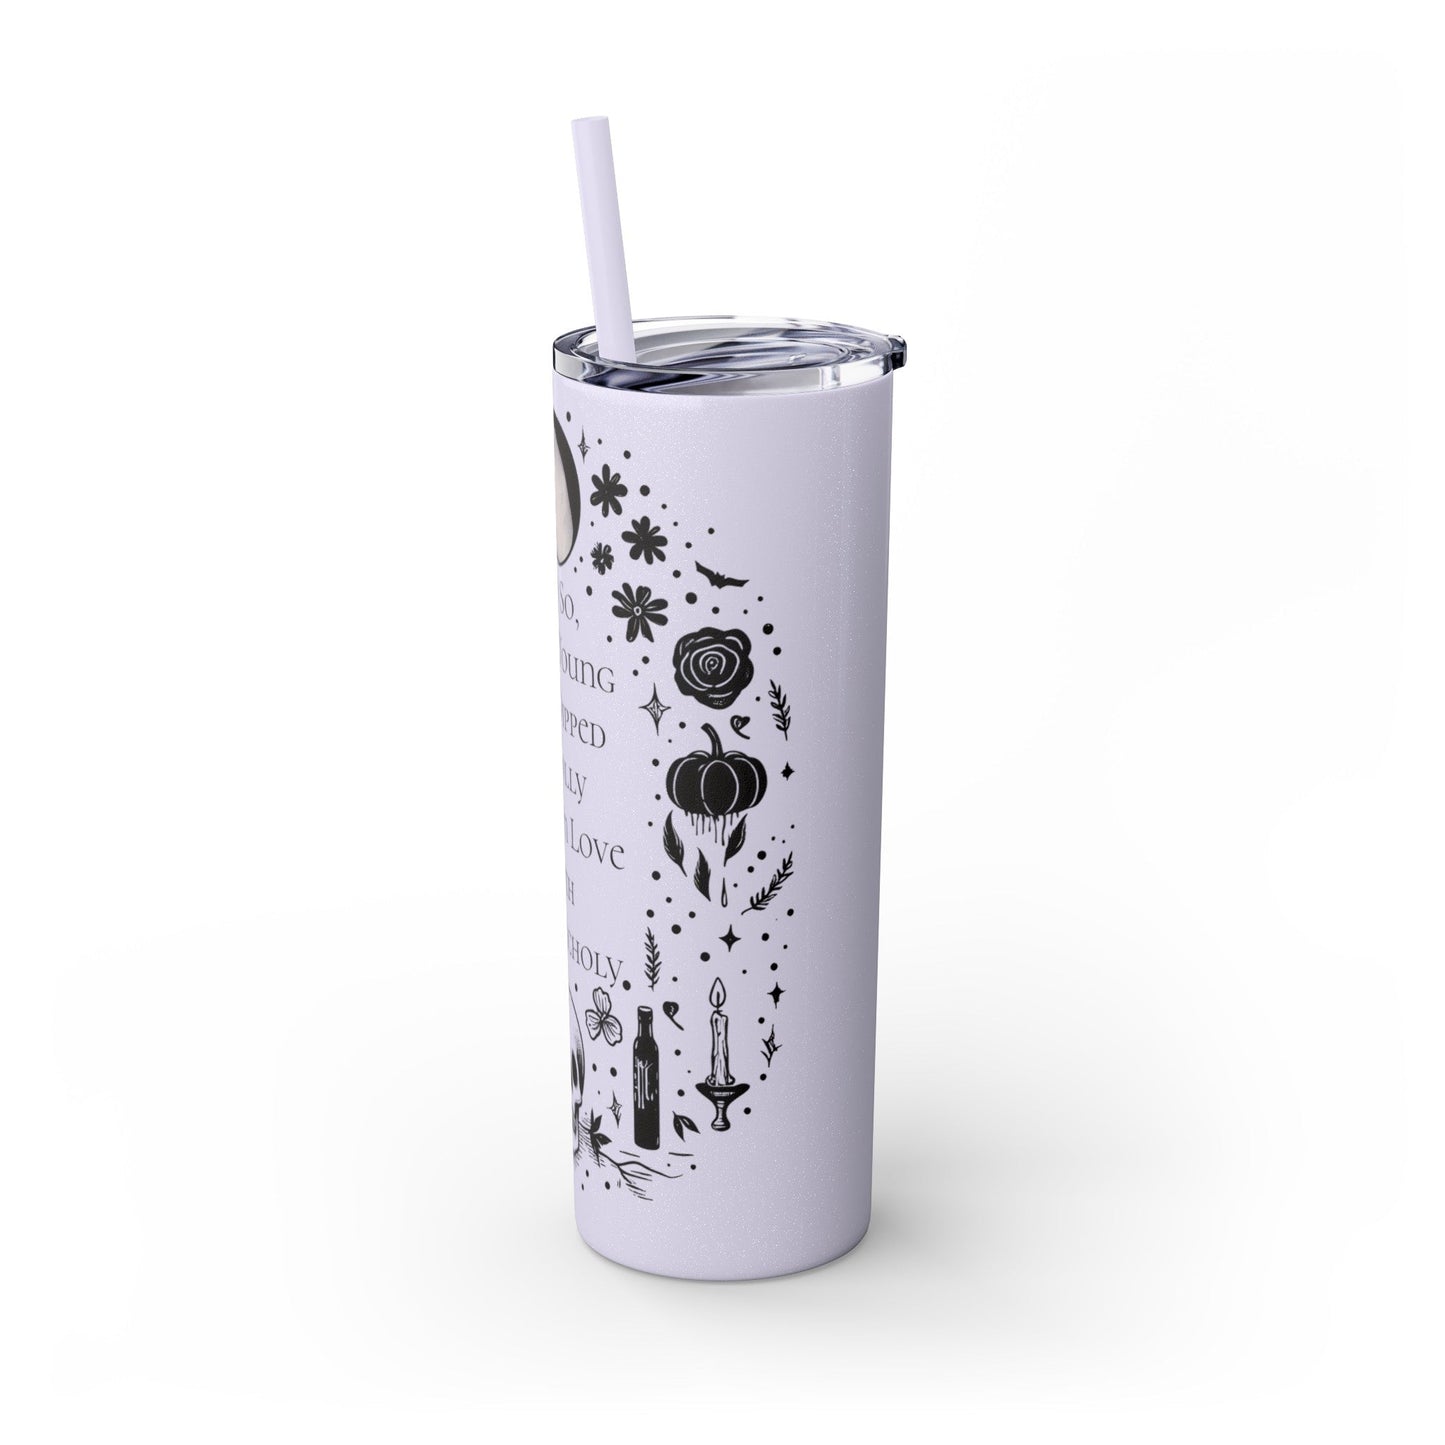 And So Being Young And Dipped In Folly I Fell In Love With Melancholy Skinny Tumbler with StrawMugVTZdesignsGlossyWhite20oz20 ozBottles & Tumblerscup